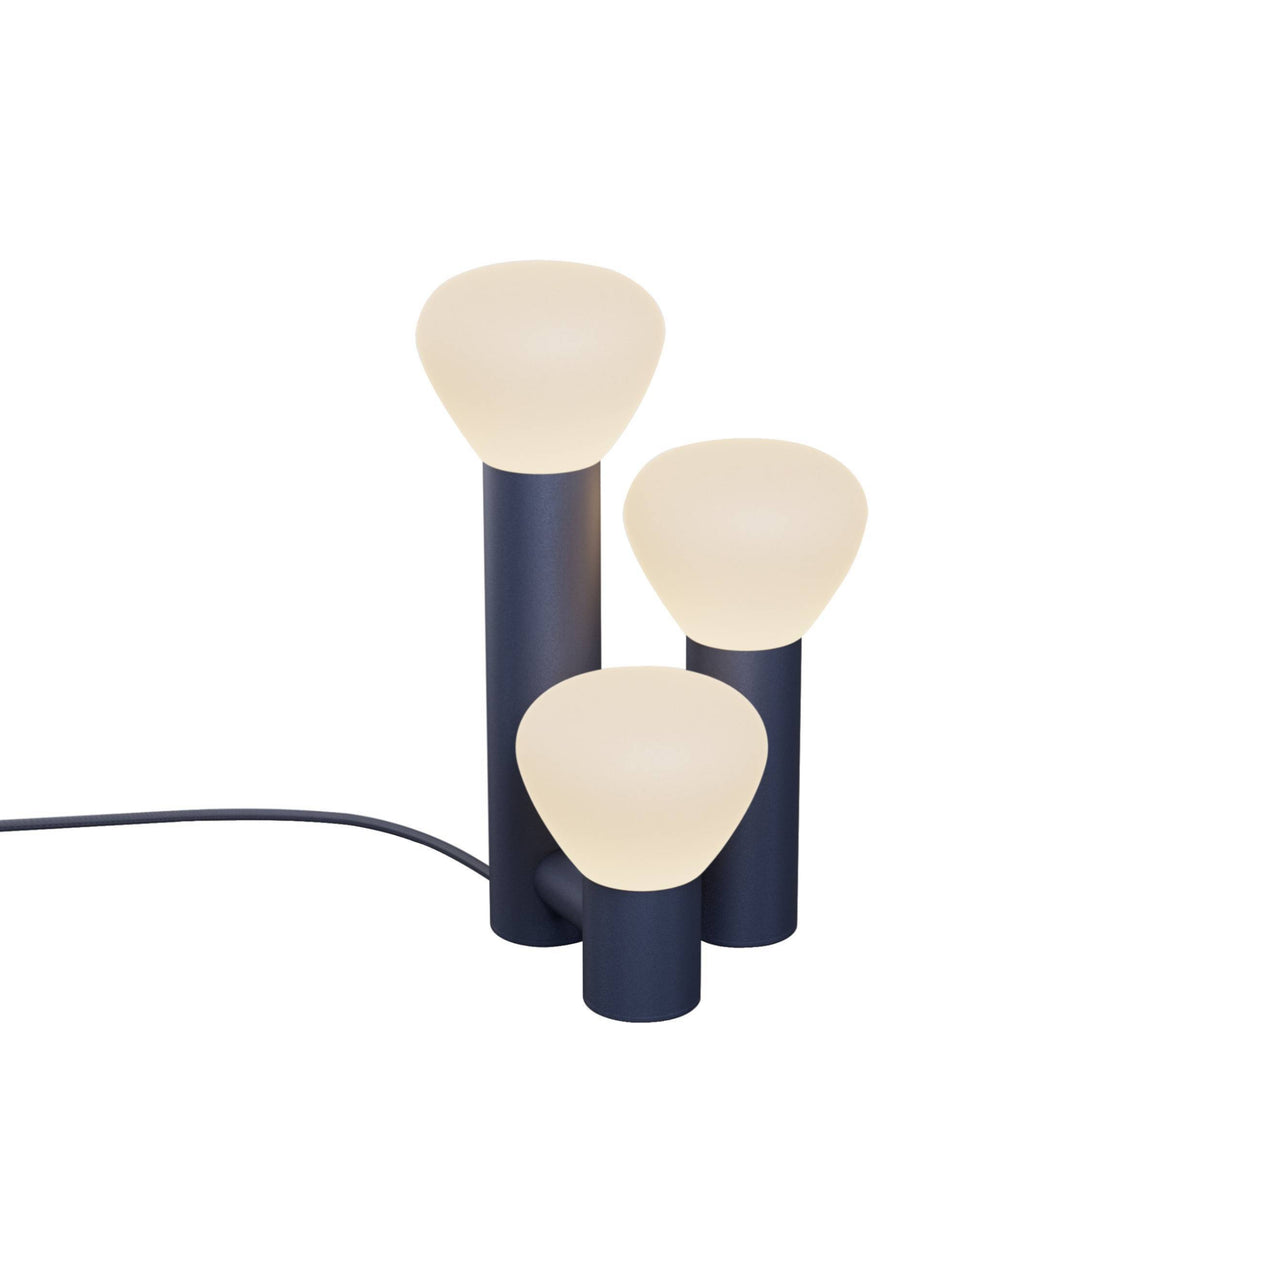 Parc 06 Table Lamp: Footswitch + Midnight Blue + Midnight Blue